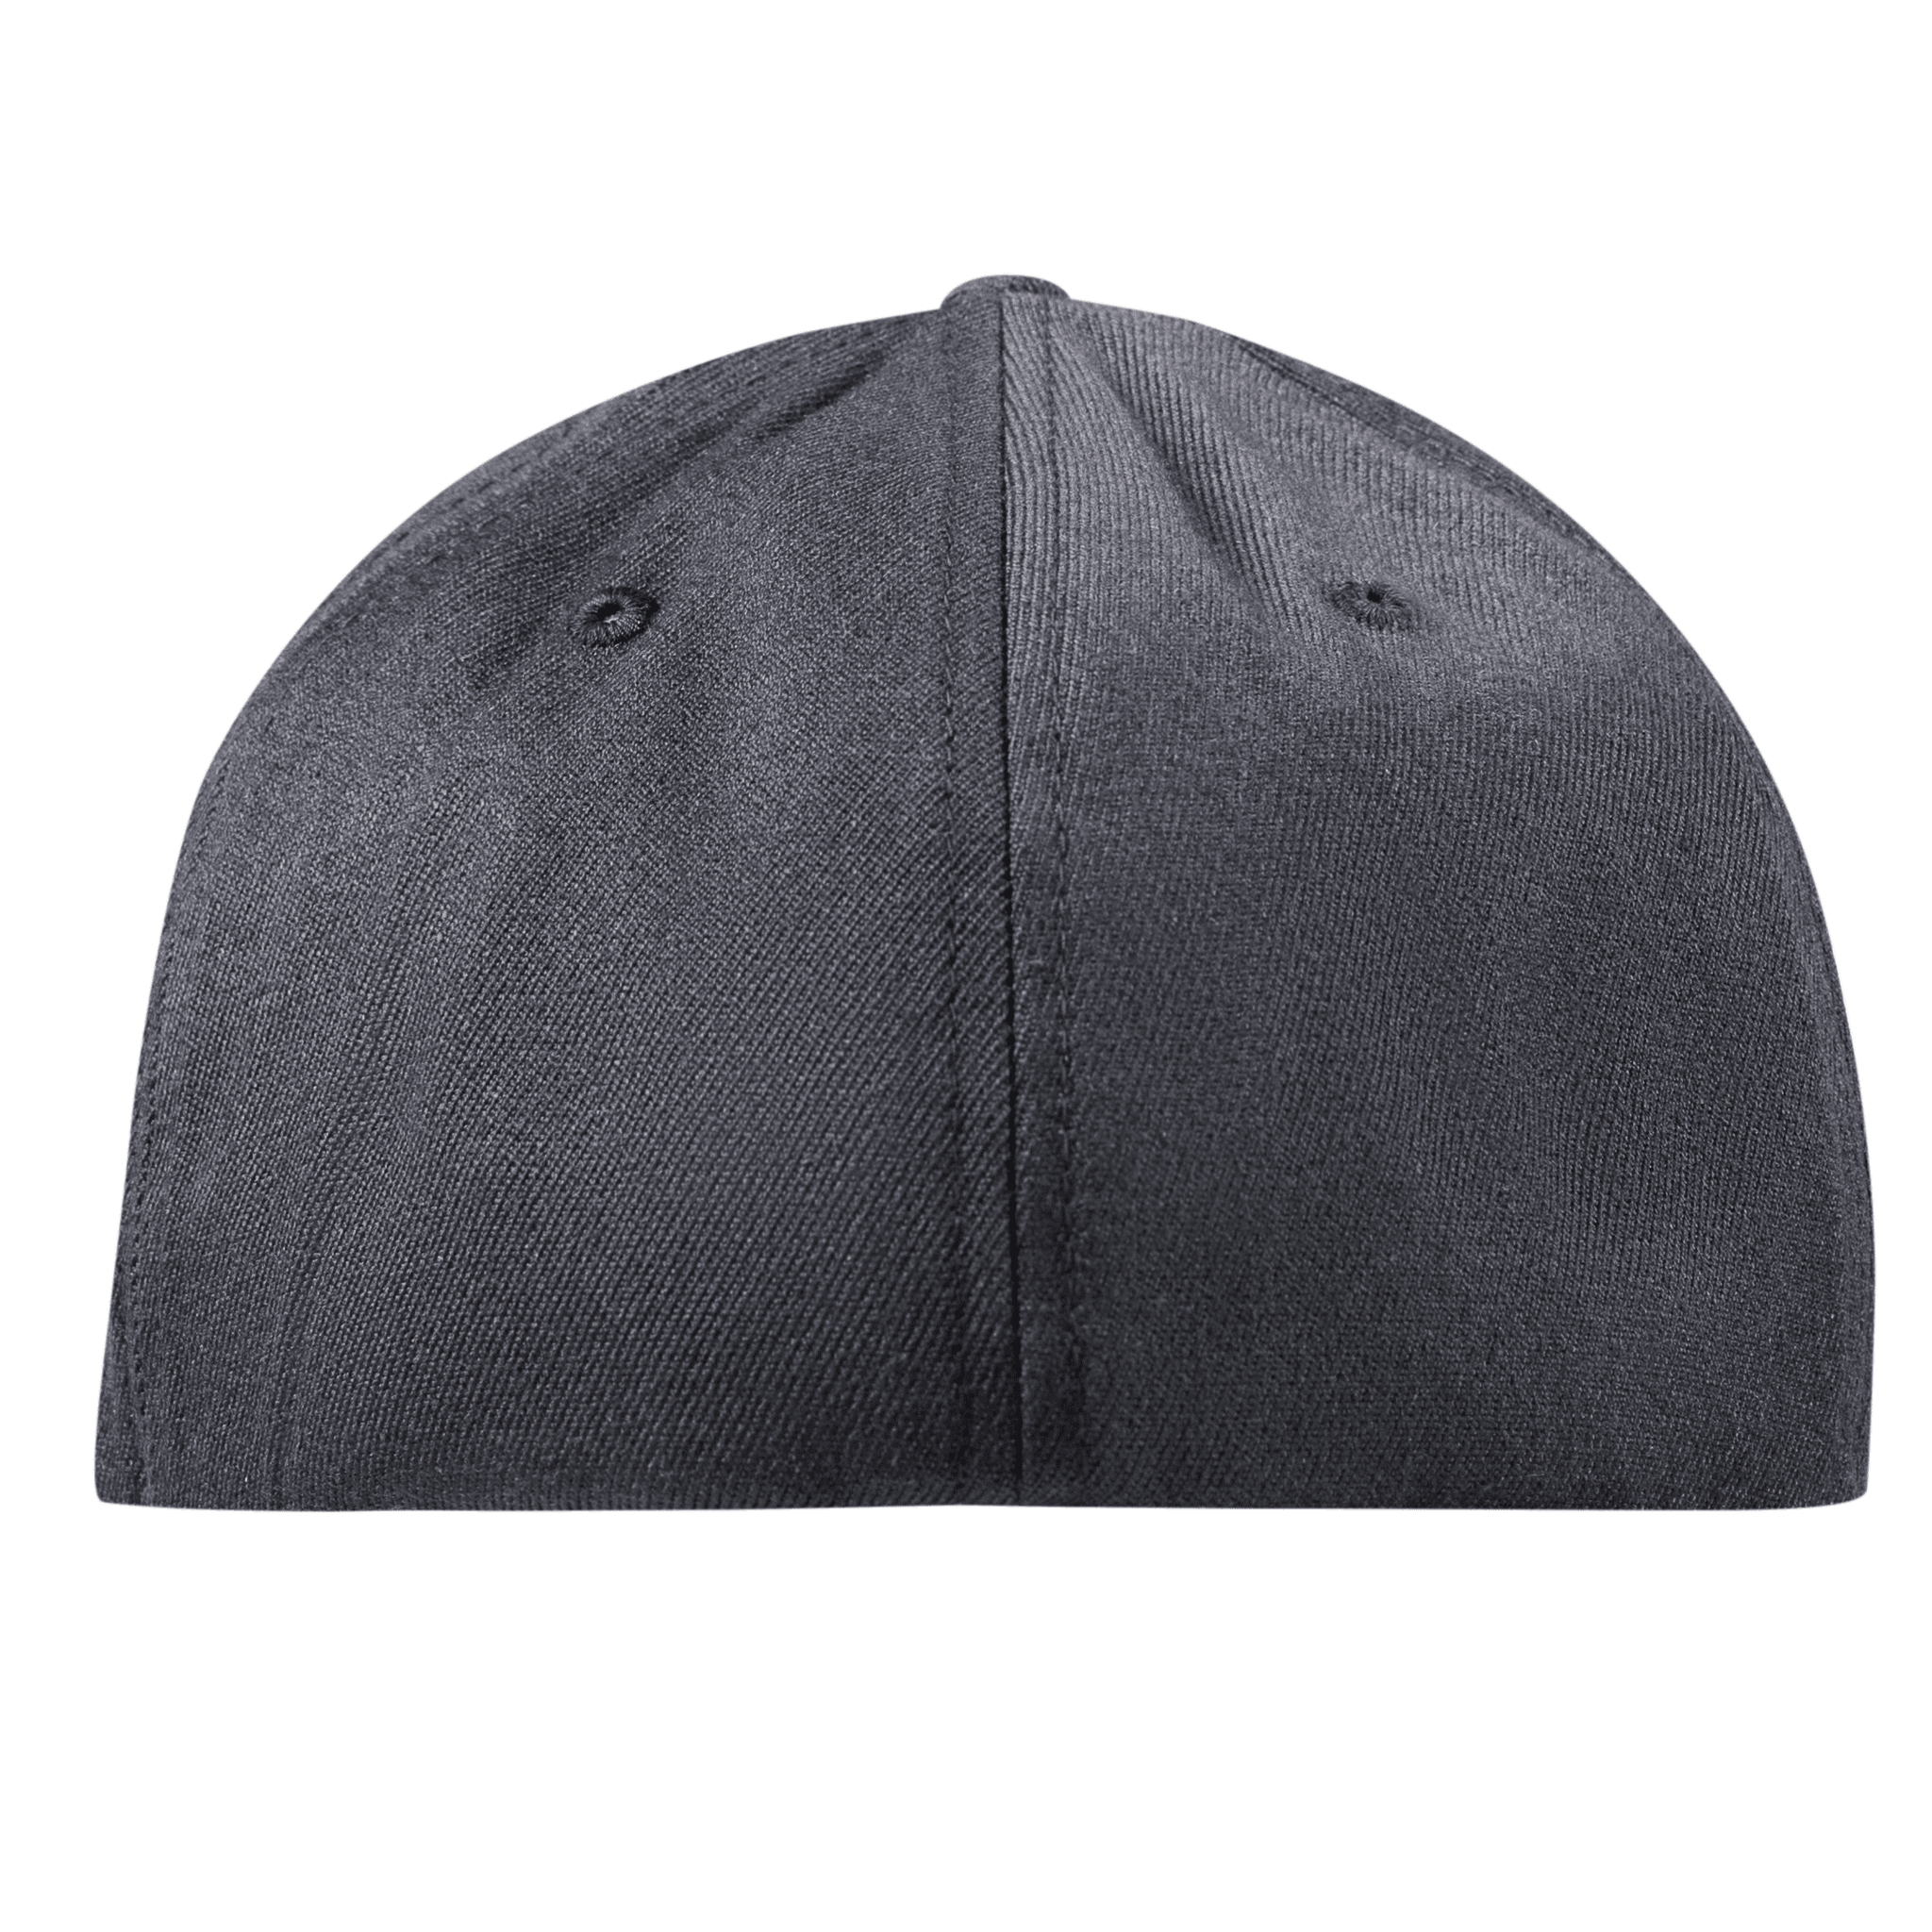 California 31 Flexfit Fitted Back Charcoal